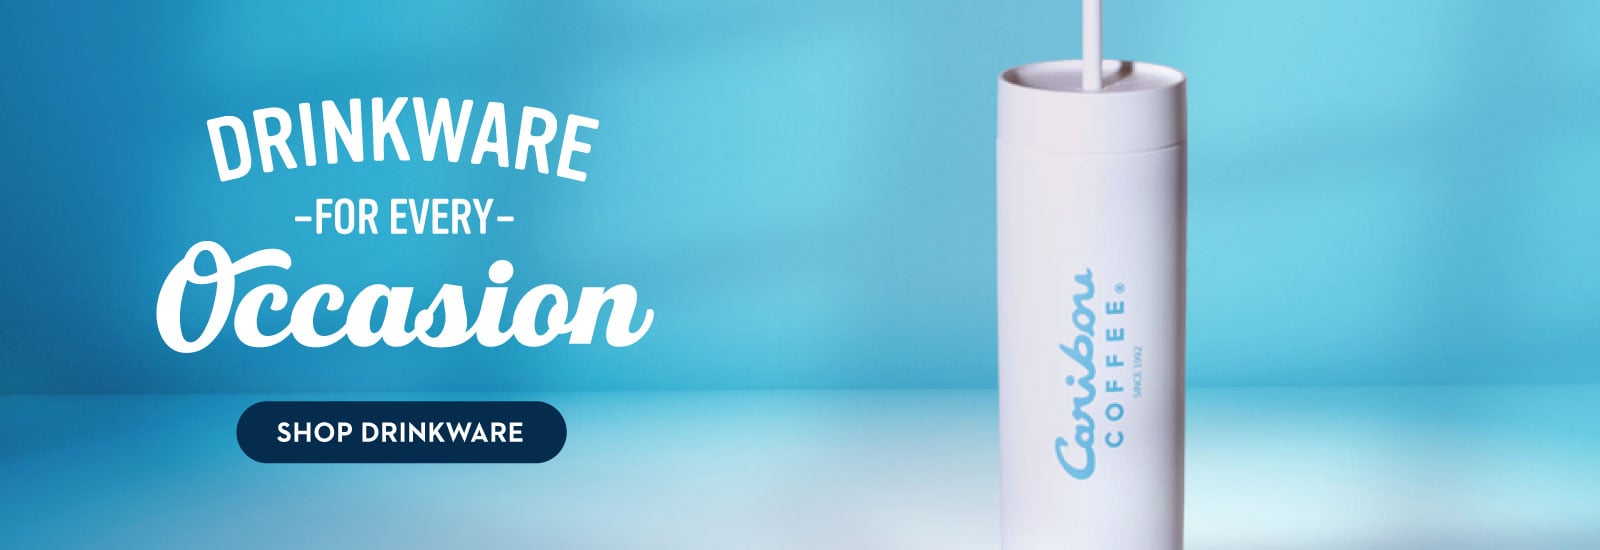 Drinkware for every occasion. Shop drinkware now.